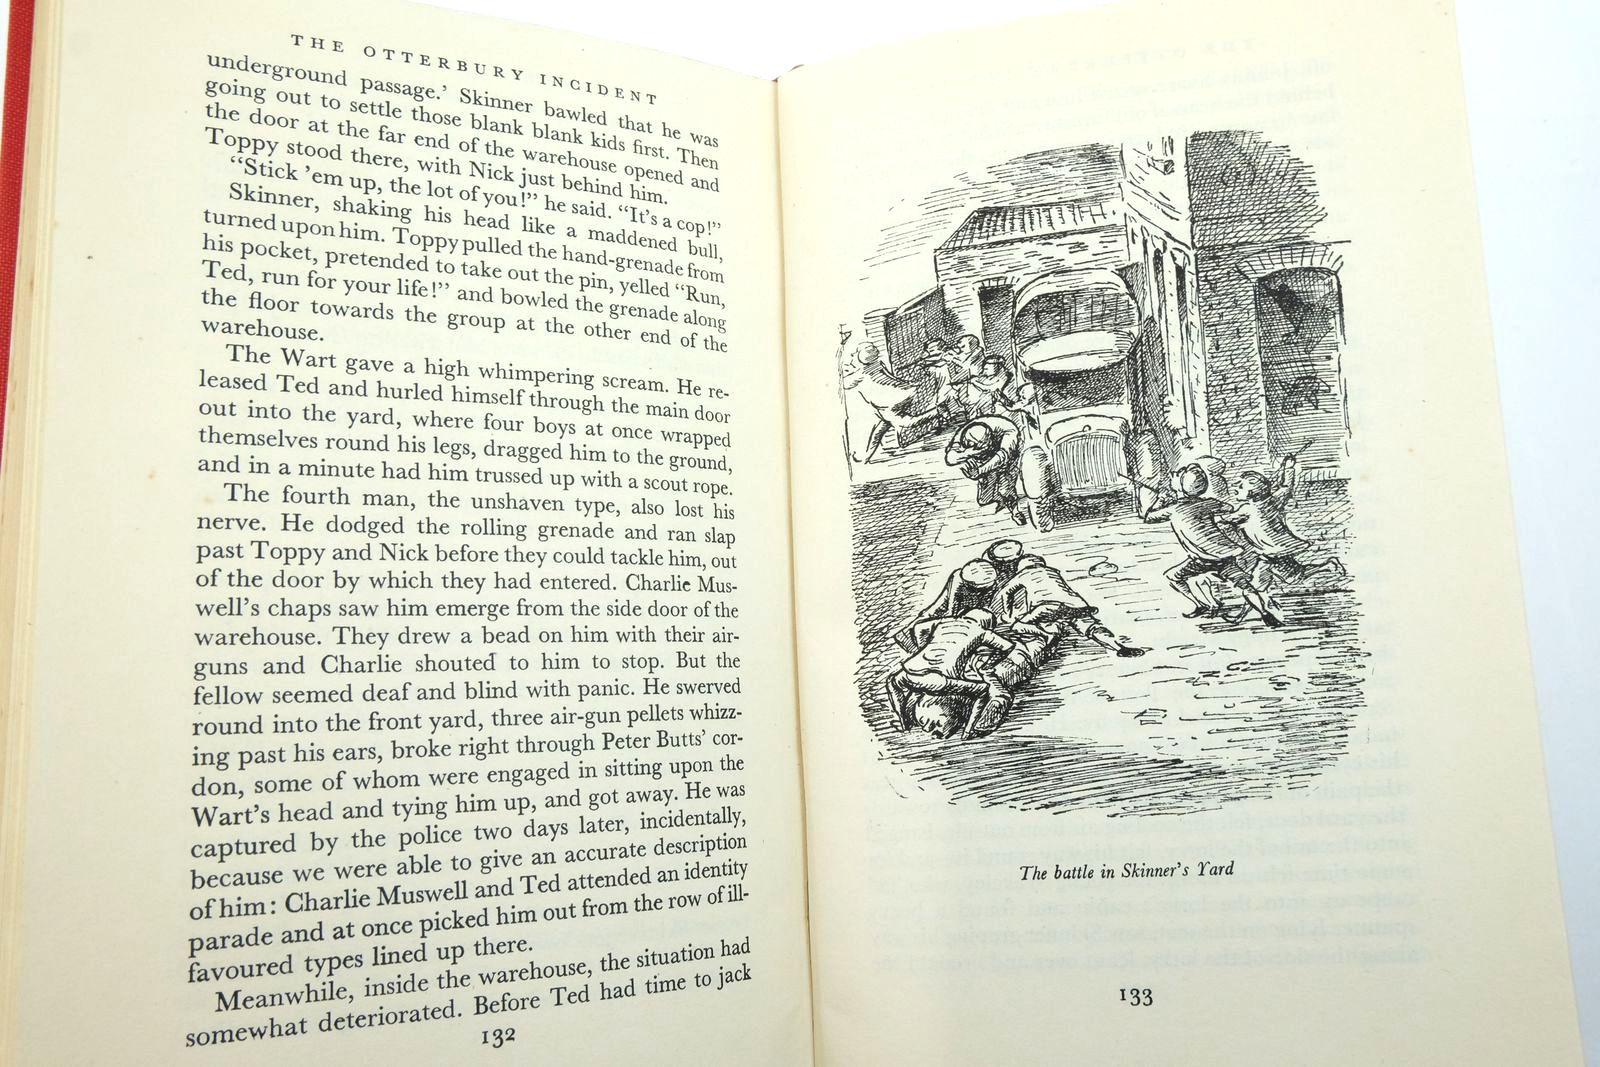 Photo of THE OTTERBURY INCIDENT written by Lewis, Cecil Day illustrated by Ardizzone, Edward published by Putnam & Co. Ltd. (STOCK CODE: 2136921)  for sale by Stella & Rose's Books